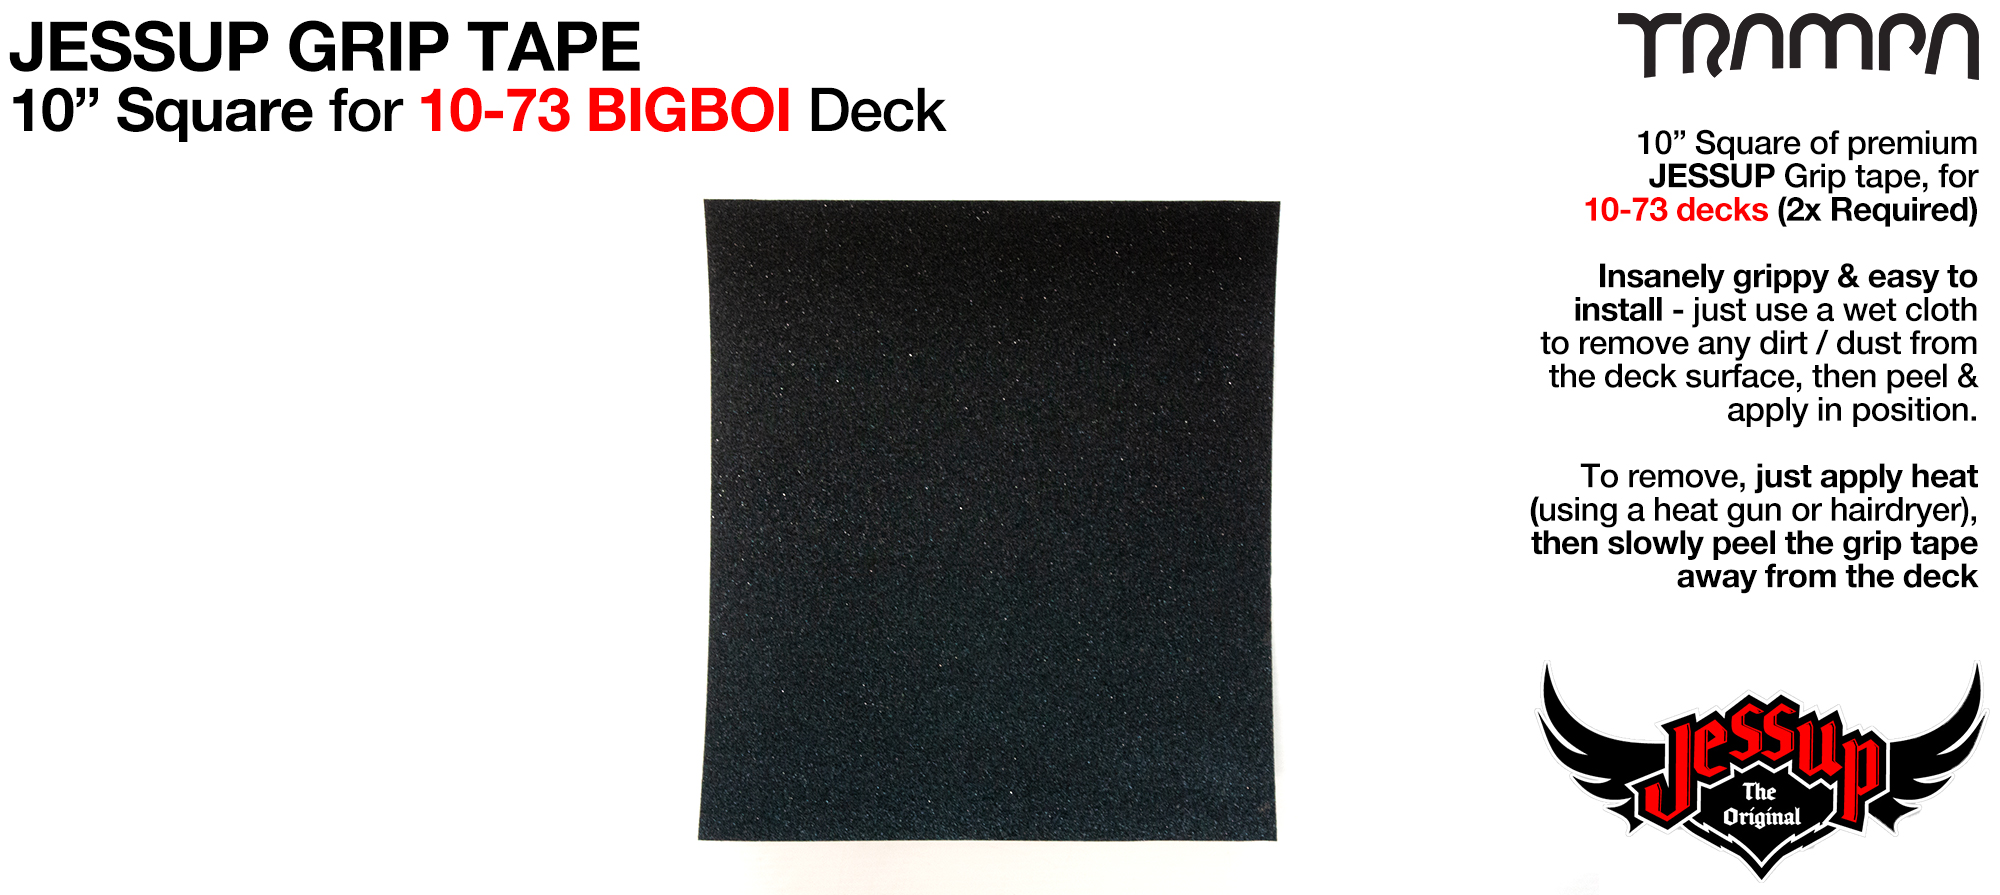 1x 10 Inch squares of Top Quality Jessup Grip tape